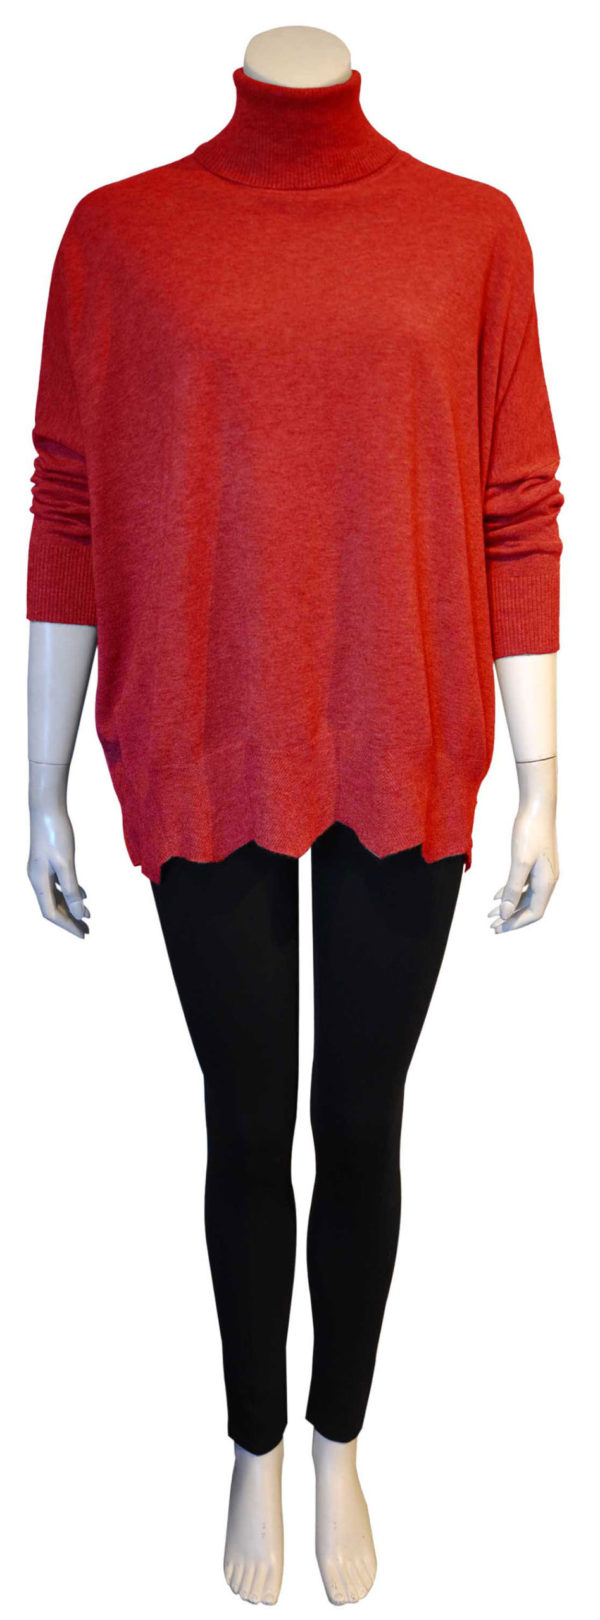 red knit turtleneck top with scallop hem- front